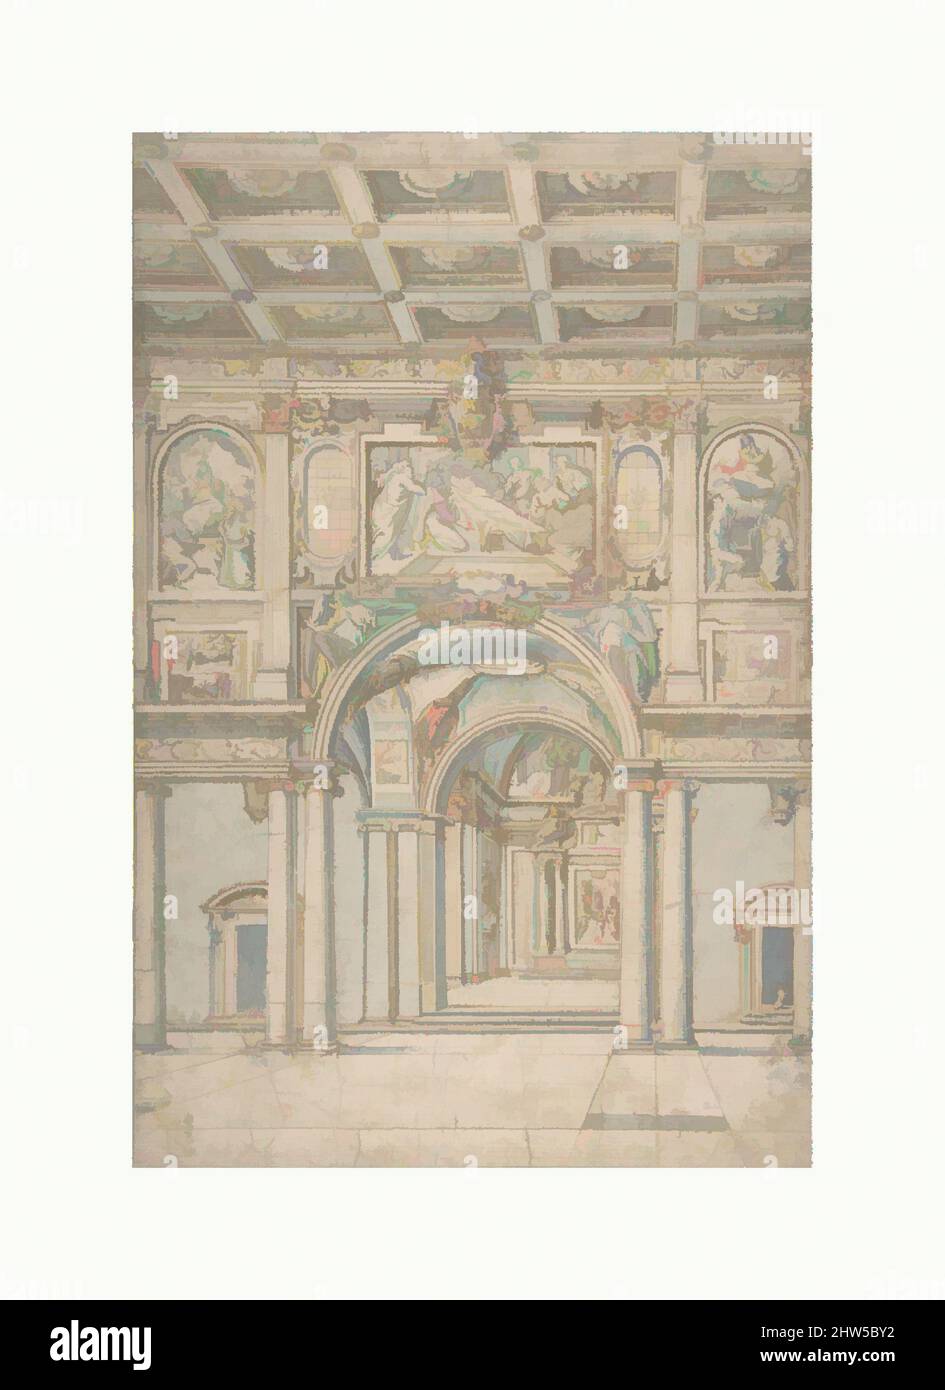 Art inspired by Study of the Interior of Santa Maria Maggiore in Rome., 1621–46, Pen and brown ink, brush with gray and blue wash, over traces of graphite, highlighted with white gouache, sheet: 15 1/8 x 9 15/16 in. (38.4 x 25.2 cm), Abbate Paolo de Angelis (Italian, 1580–1647, Classic works modernized by Artotop with a splash of modernity. Shapes, color and value, eye-catching visual impact on art. Emotions through freedom of artworks in a contemporary way. A timeless message pursuing a wildly creative new direction. Artists turning to the digital medium and creating the Artotop NFT Stock Photo